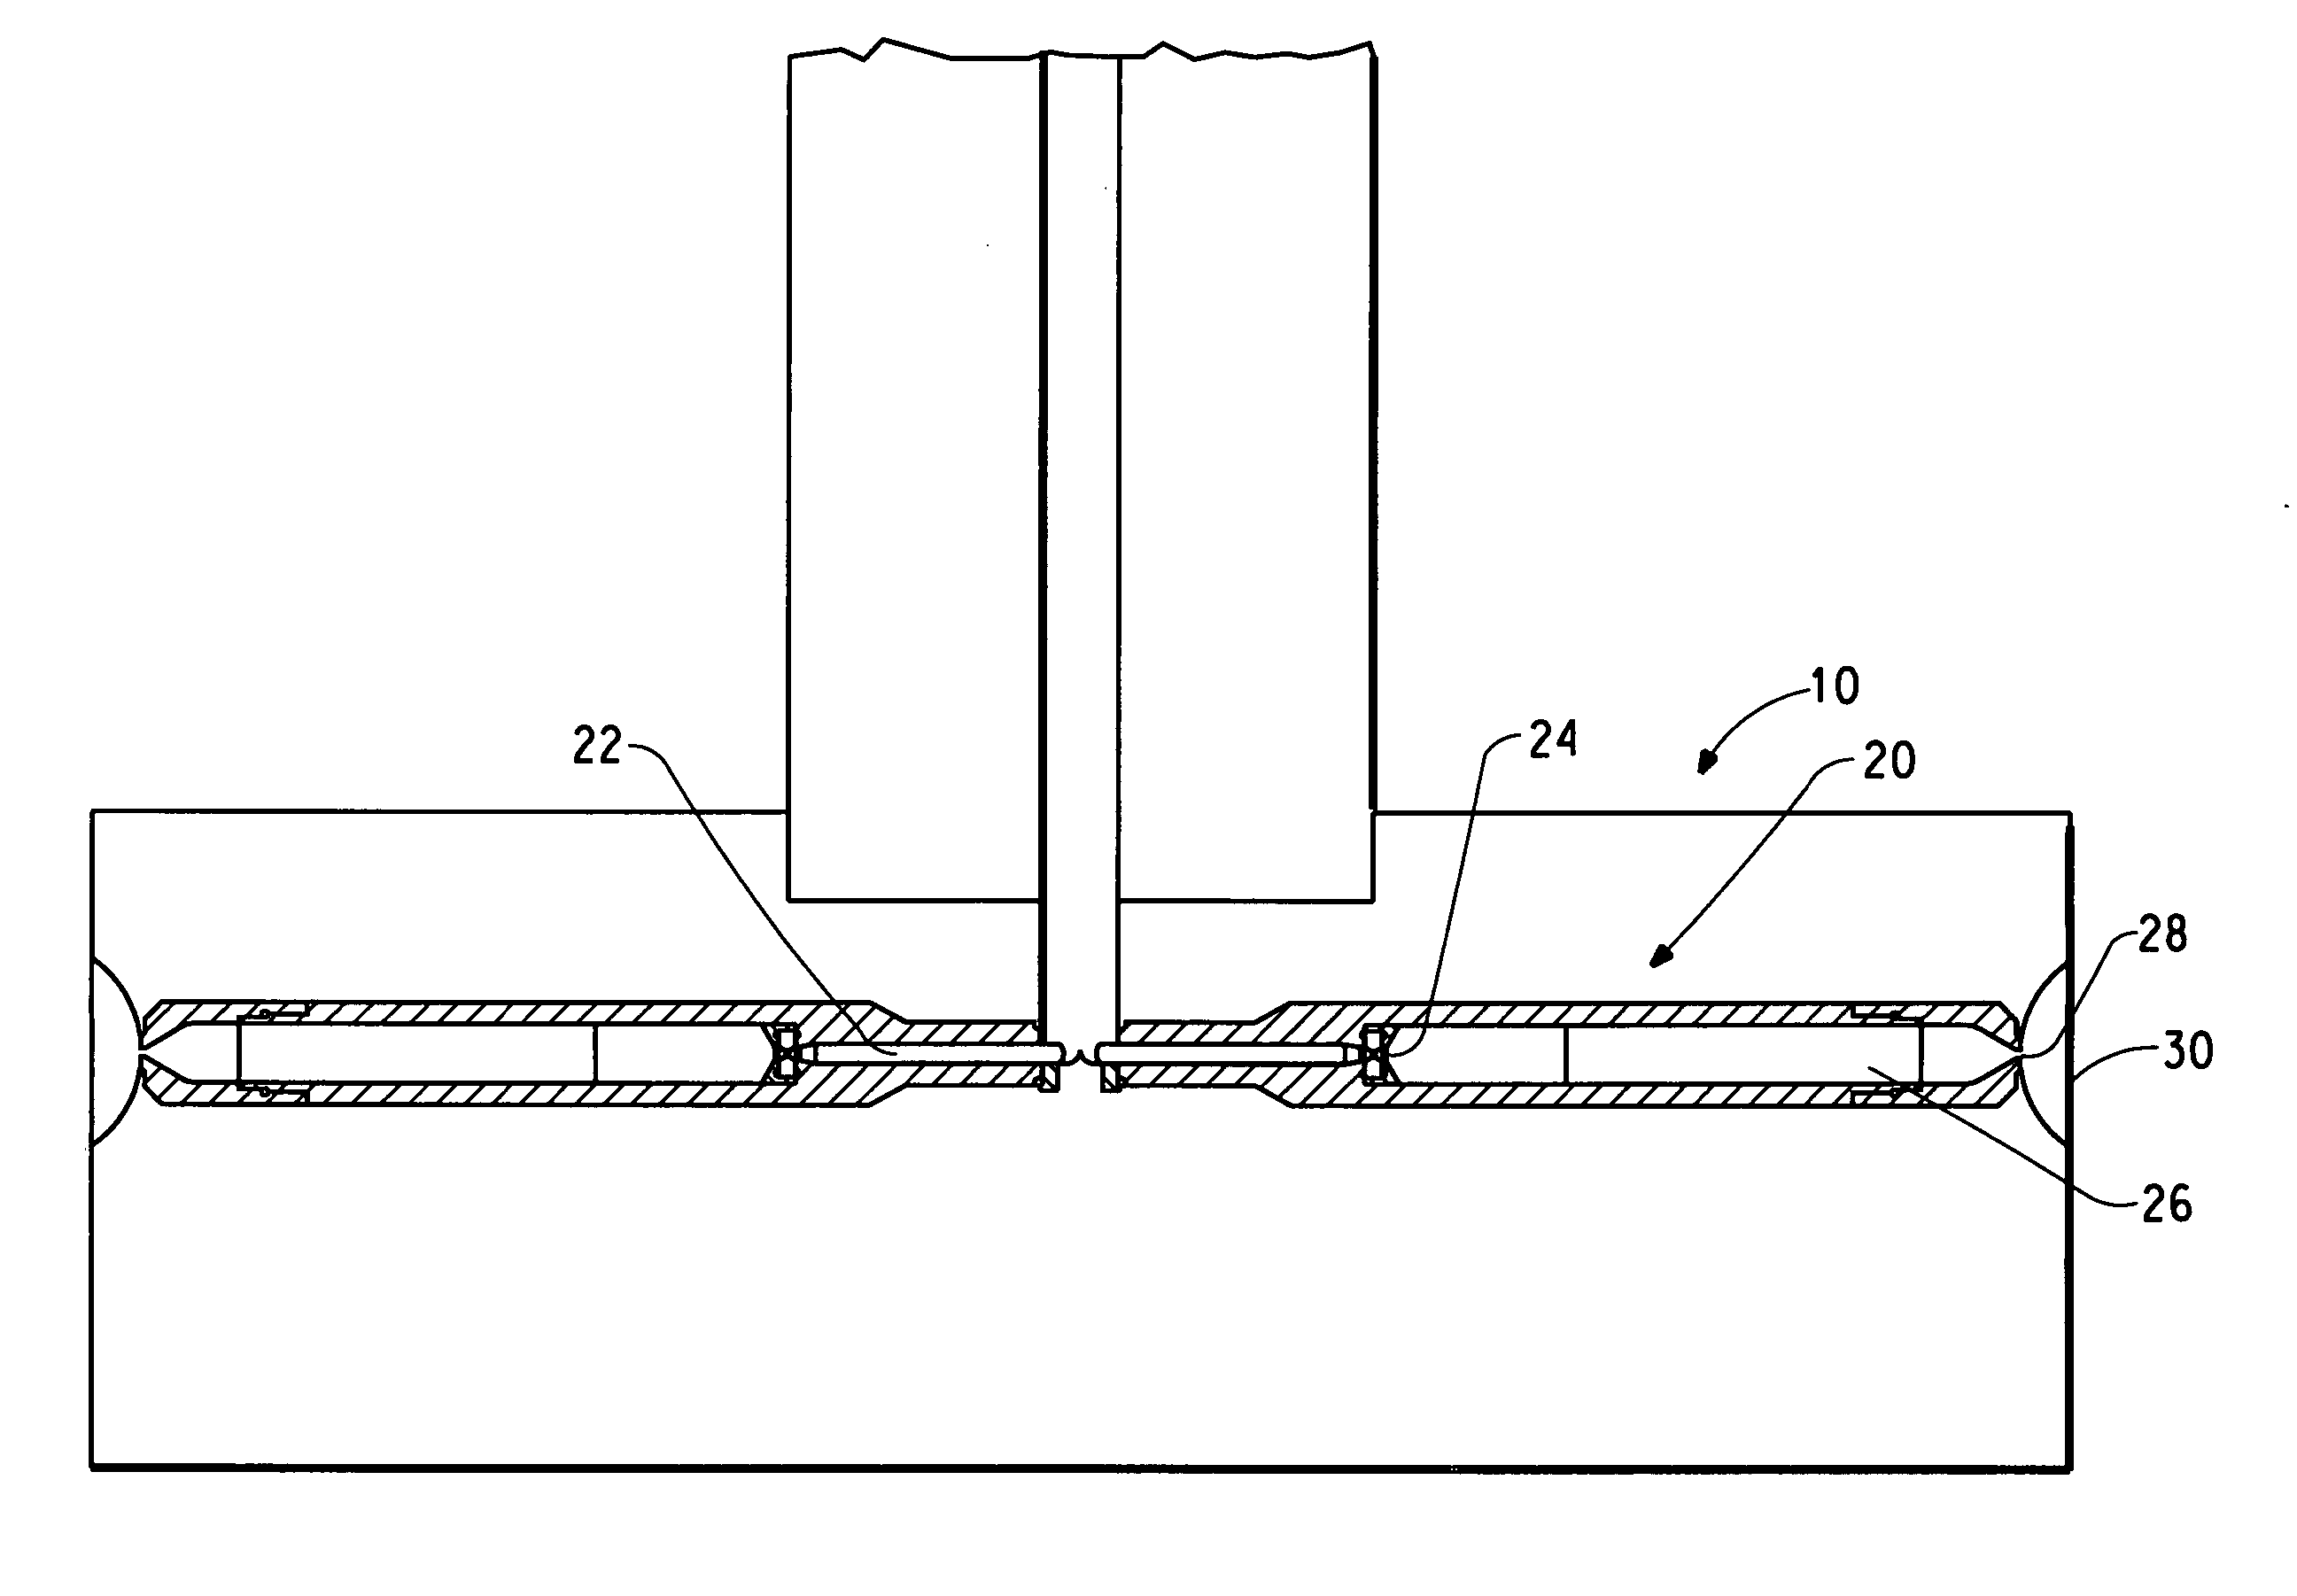 Rotary process for forming uniform material